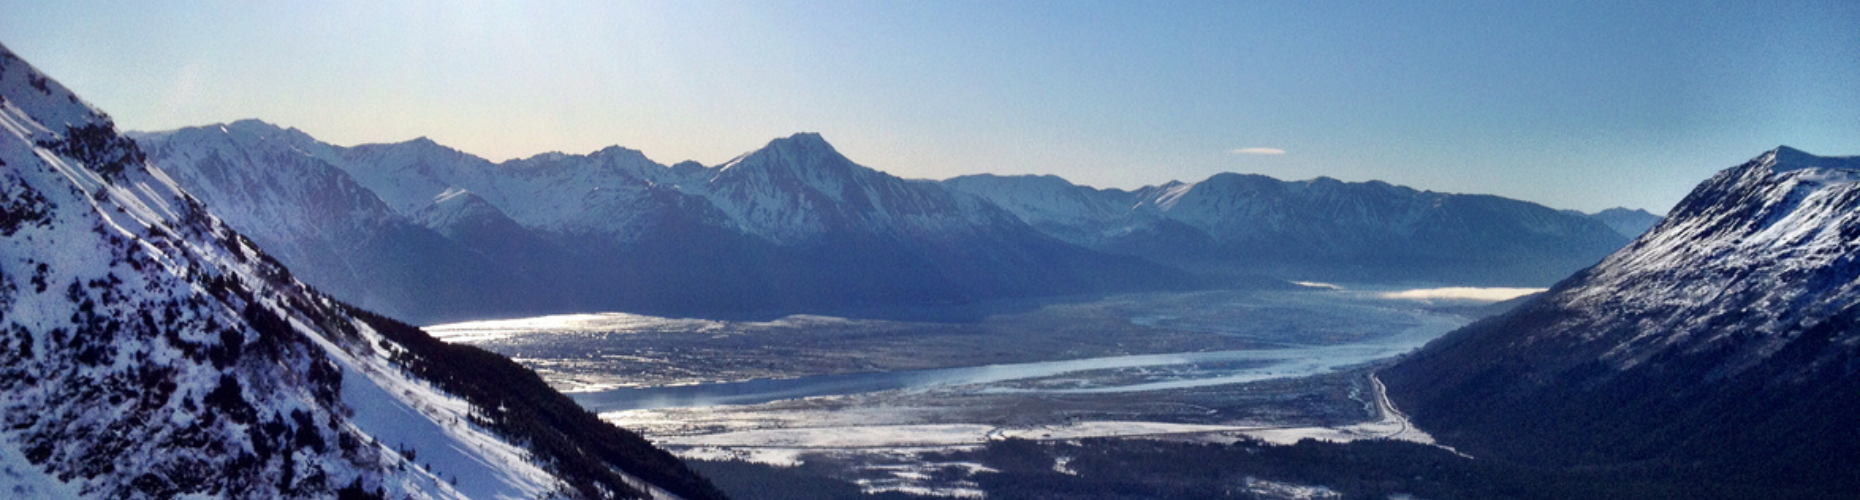 Anchorage as seen from the Northwest with Chugach Range in the background